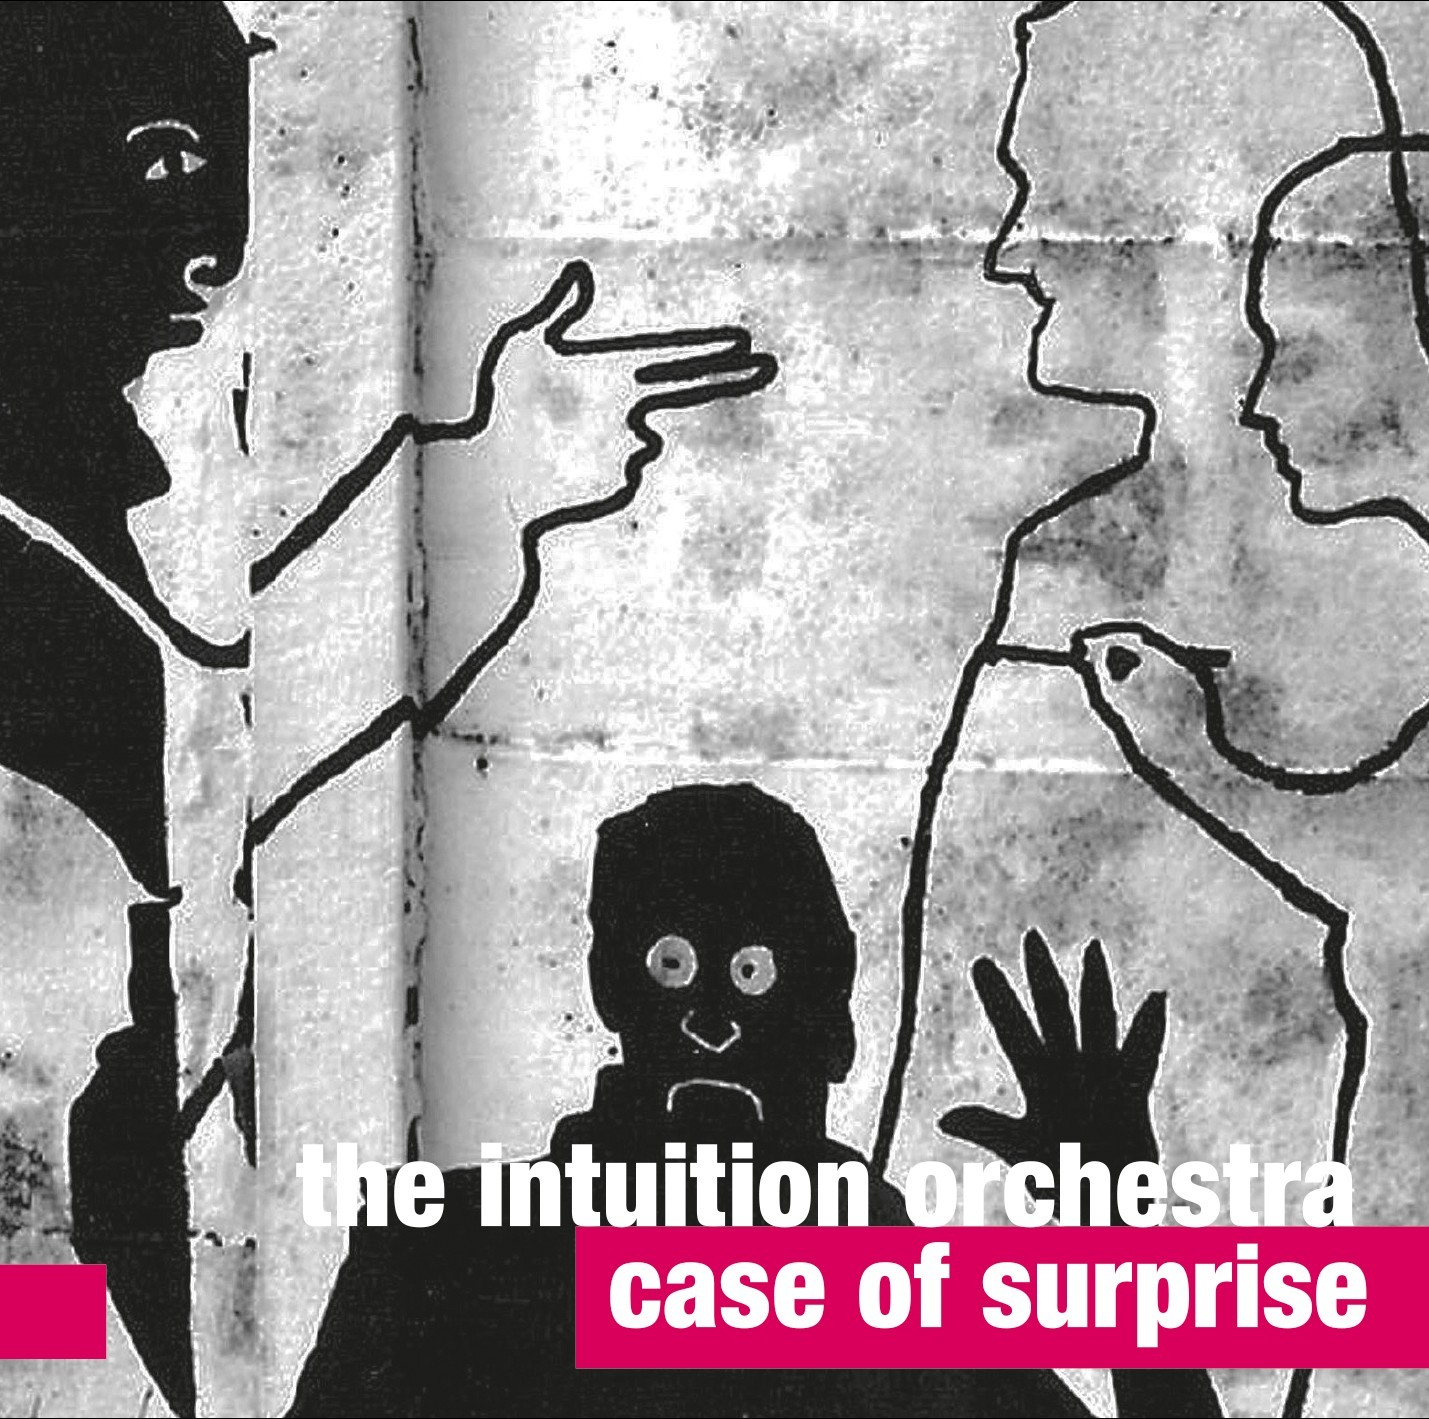 The Intuition Orchestra Case of Surprise